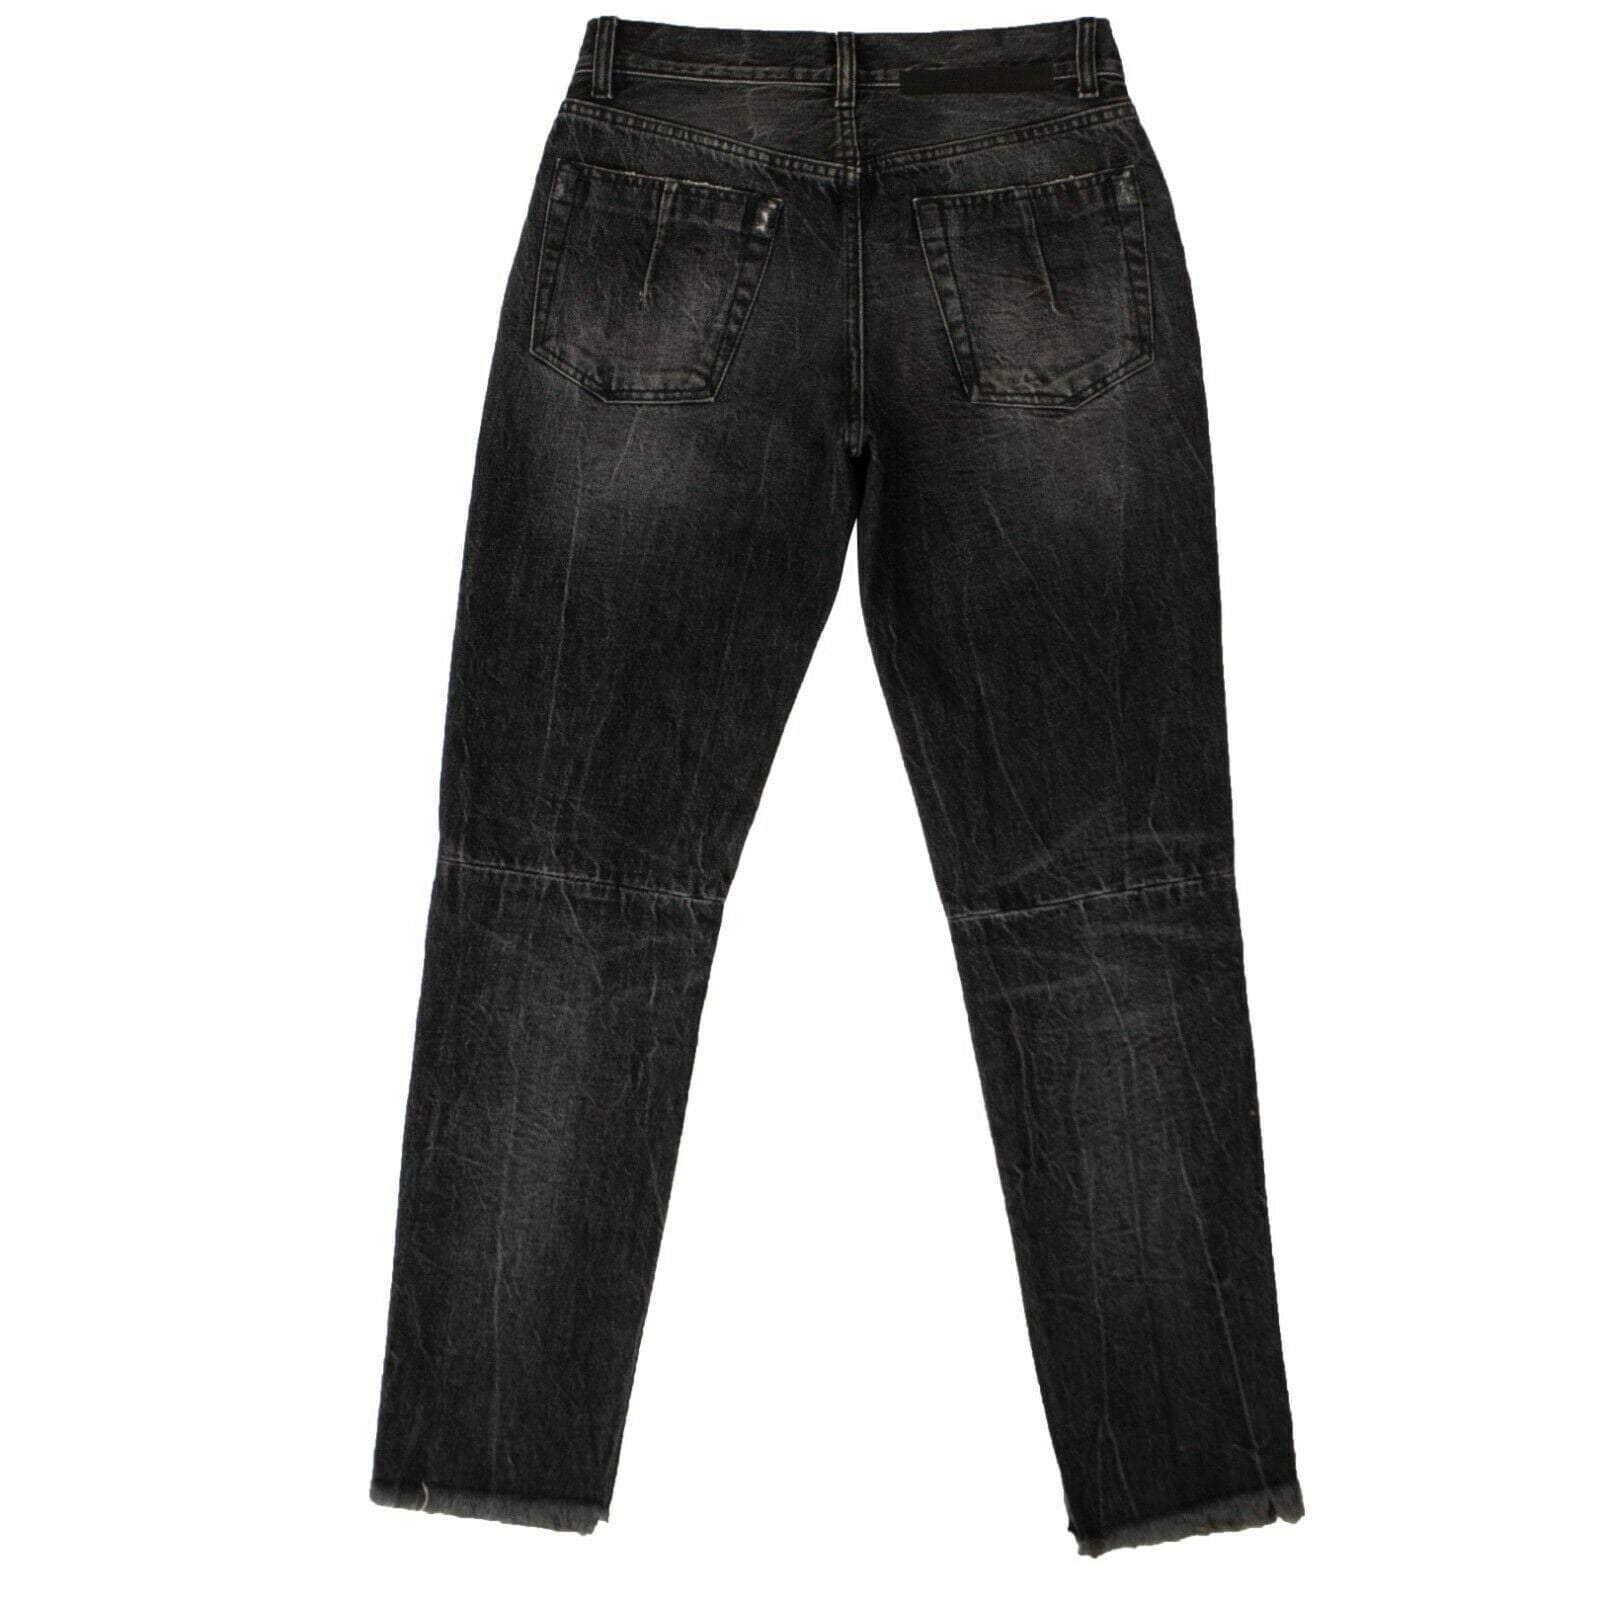 UNRAVEL PROJECT channelenable-all, couponcollection, gender-womens, main-clothing, sale-enable, size-26, under-250, unravel-project, womens-straight-jeans 26 Black Moonwash High Waisted Jeans 82NGG-UN-1194/26 82NGG-UN-1194/26